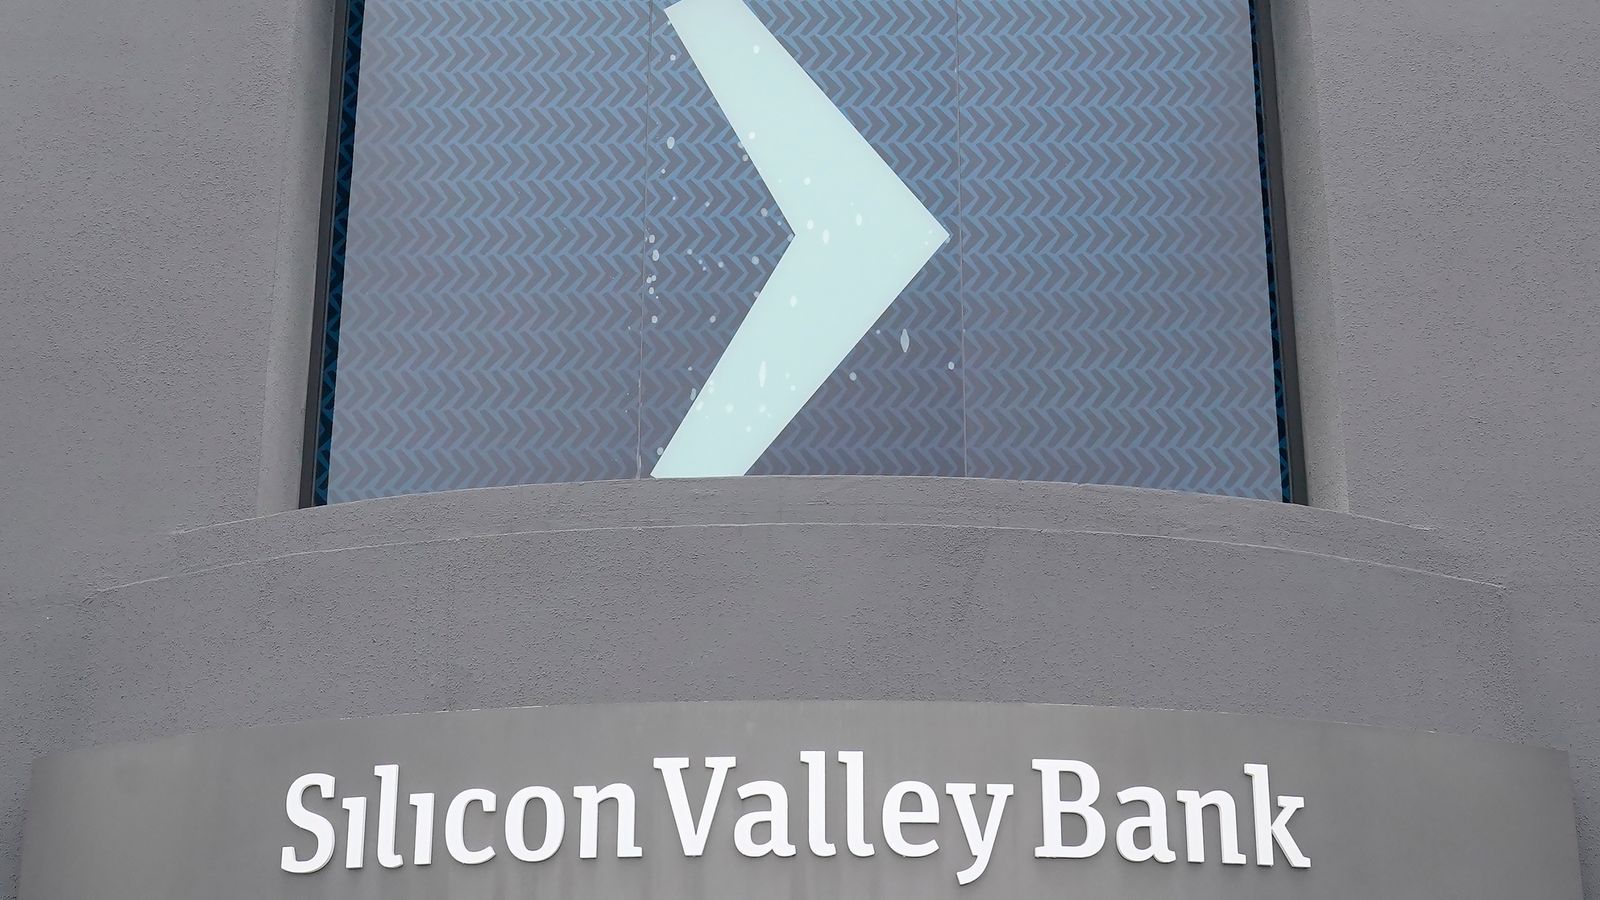 Bank of London submits rescue bid for UK arm of Silicon Valley Bank